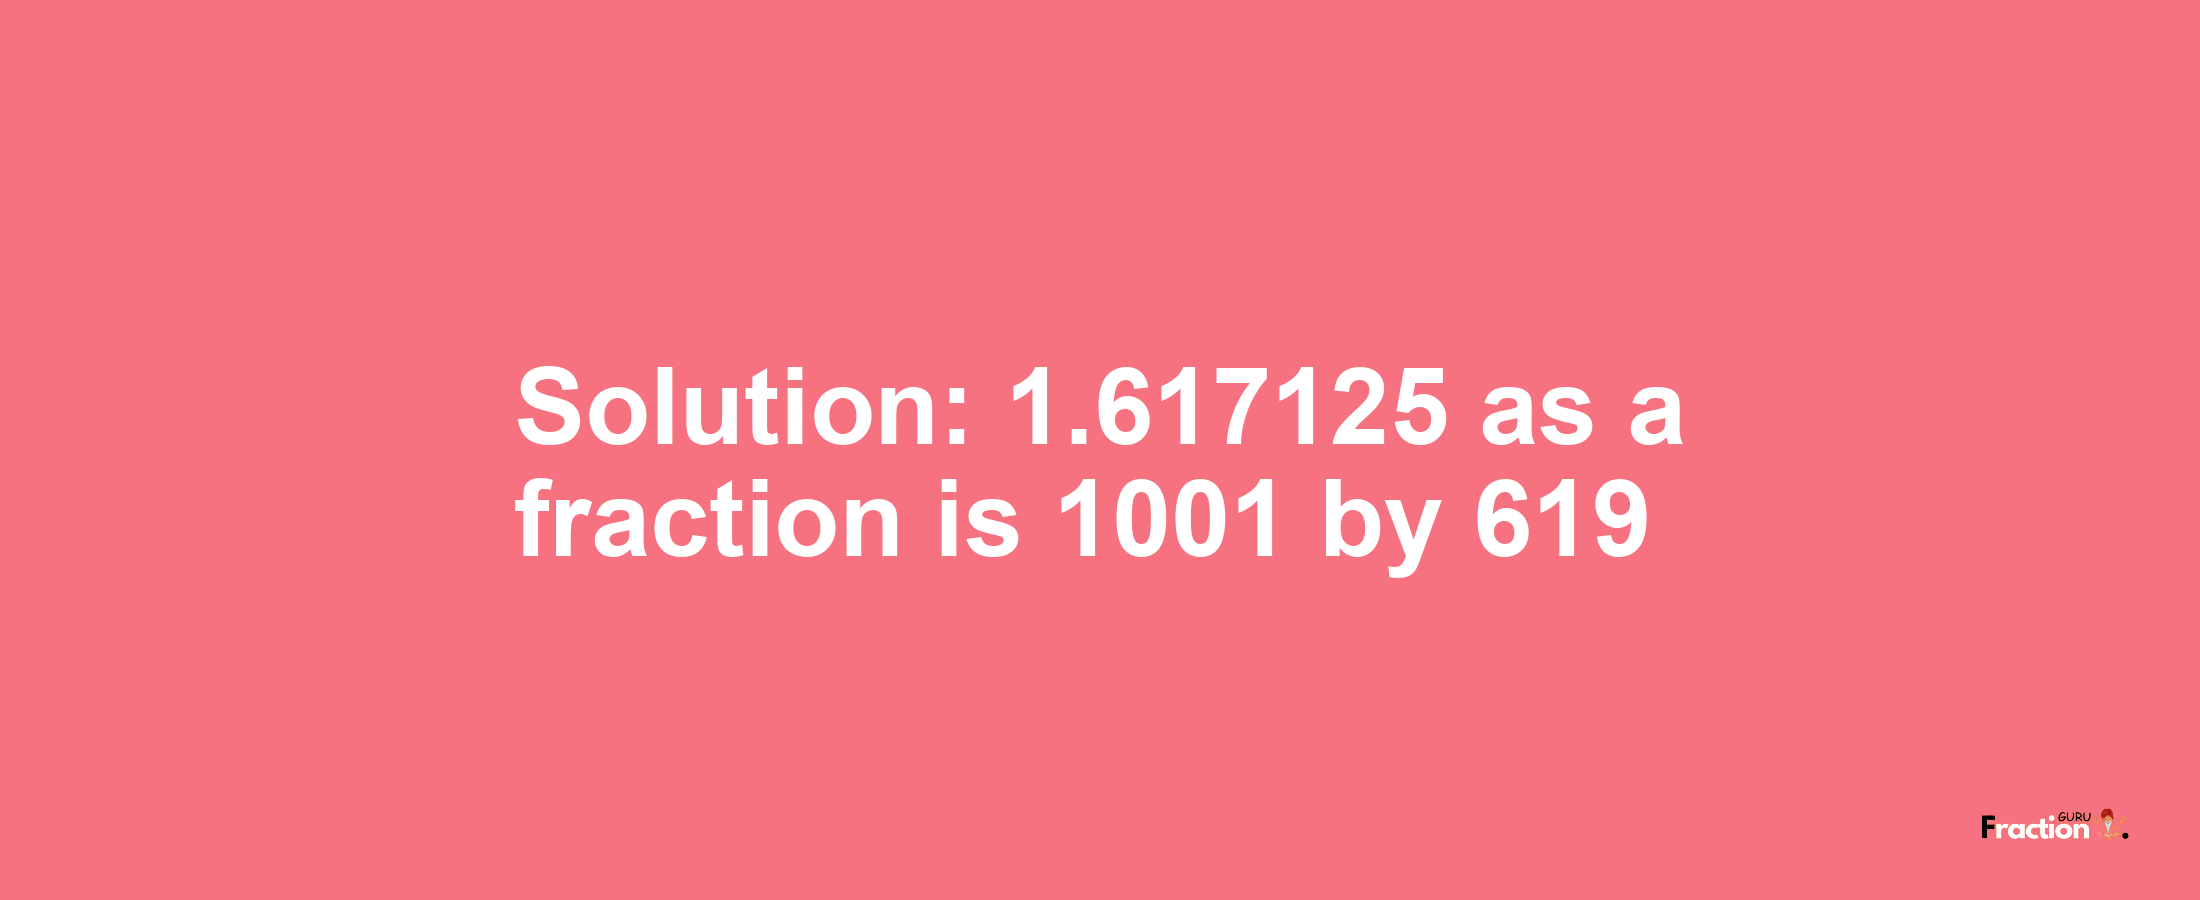 Solution:1.617125 as a fraction is 1001/619